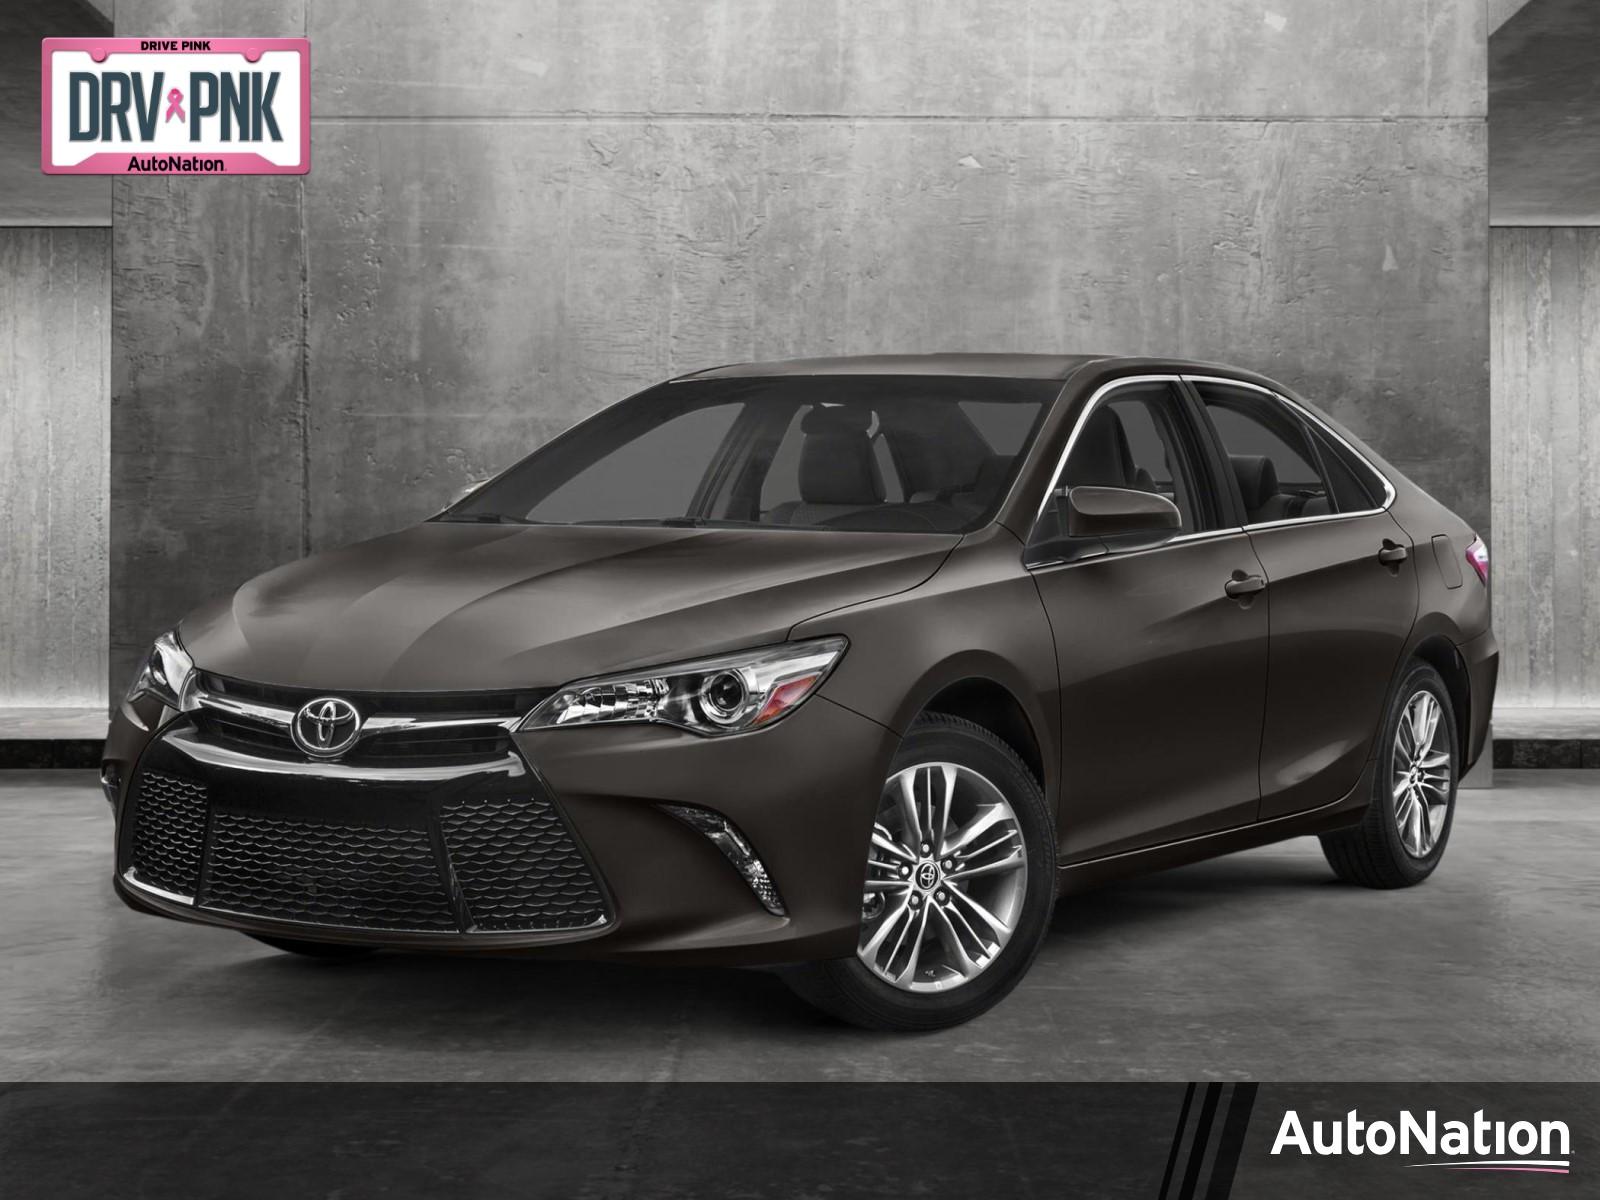 2016 Toyota Camry Vehicle Photo in PEMBROKE PINES, FL 33024-6534